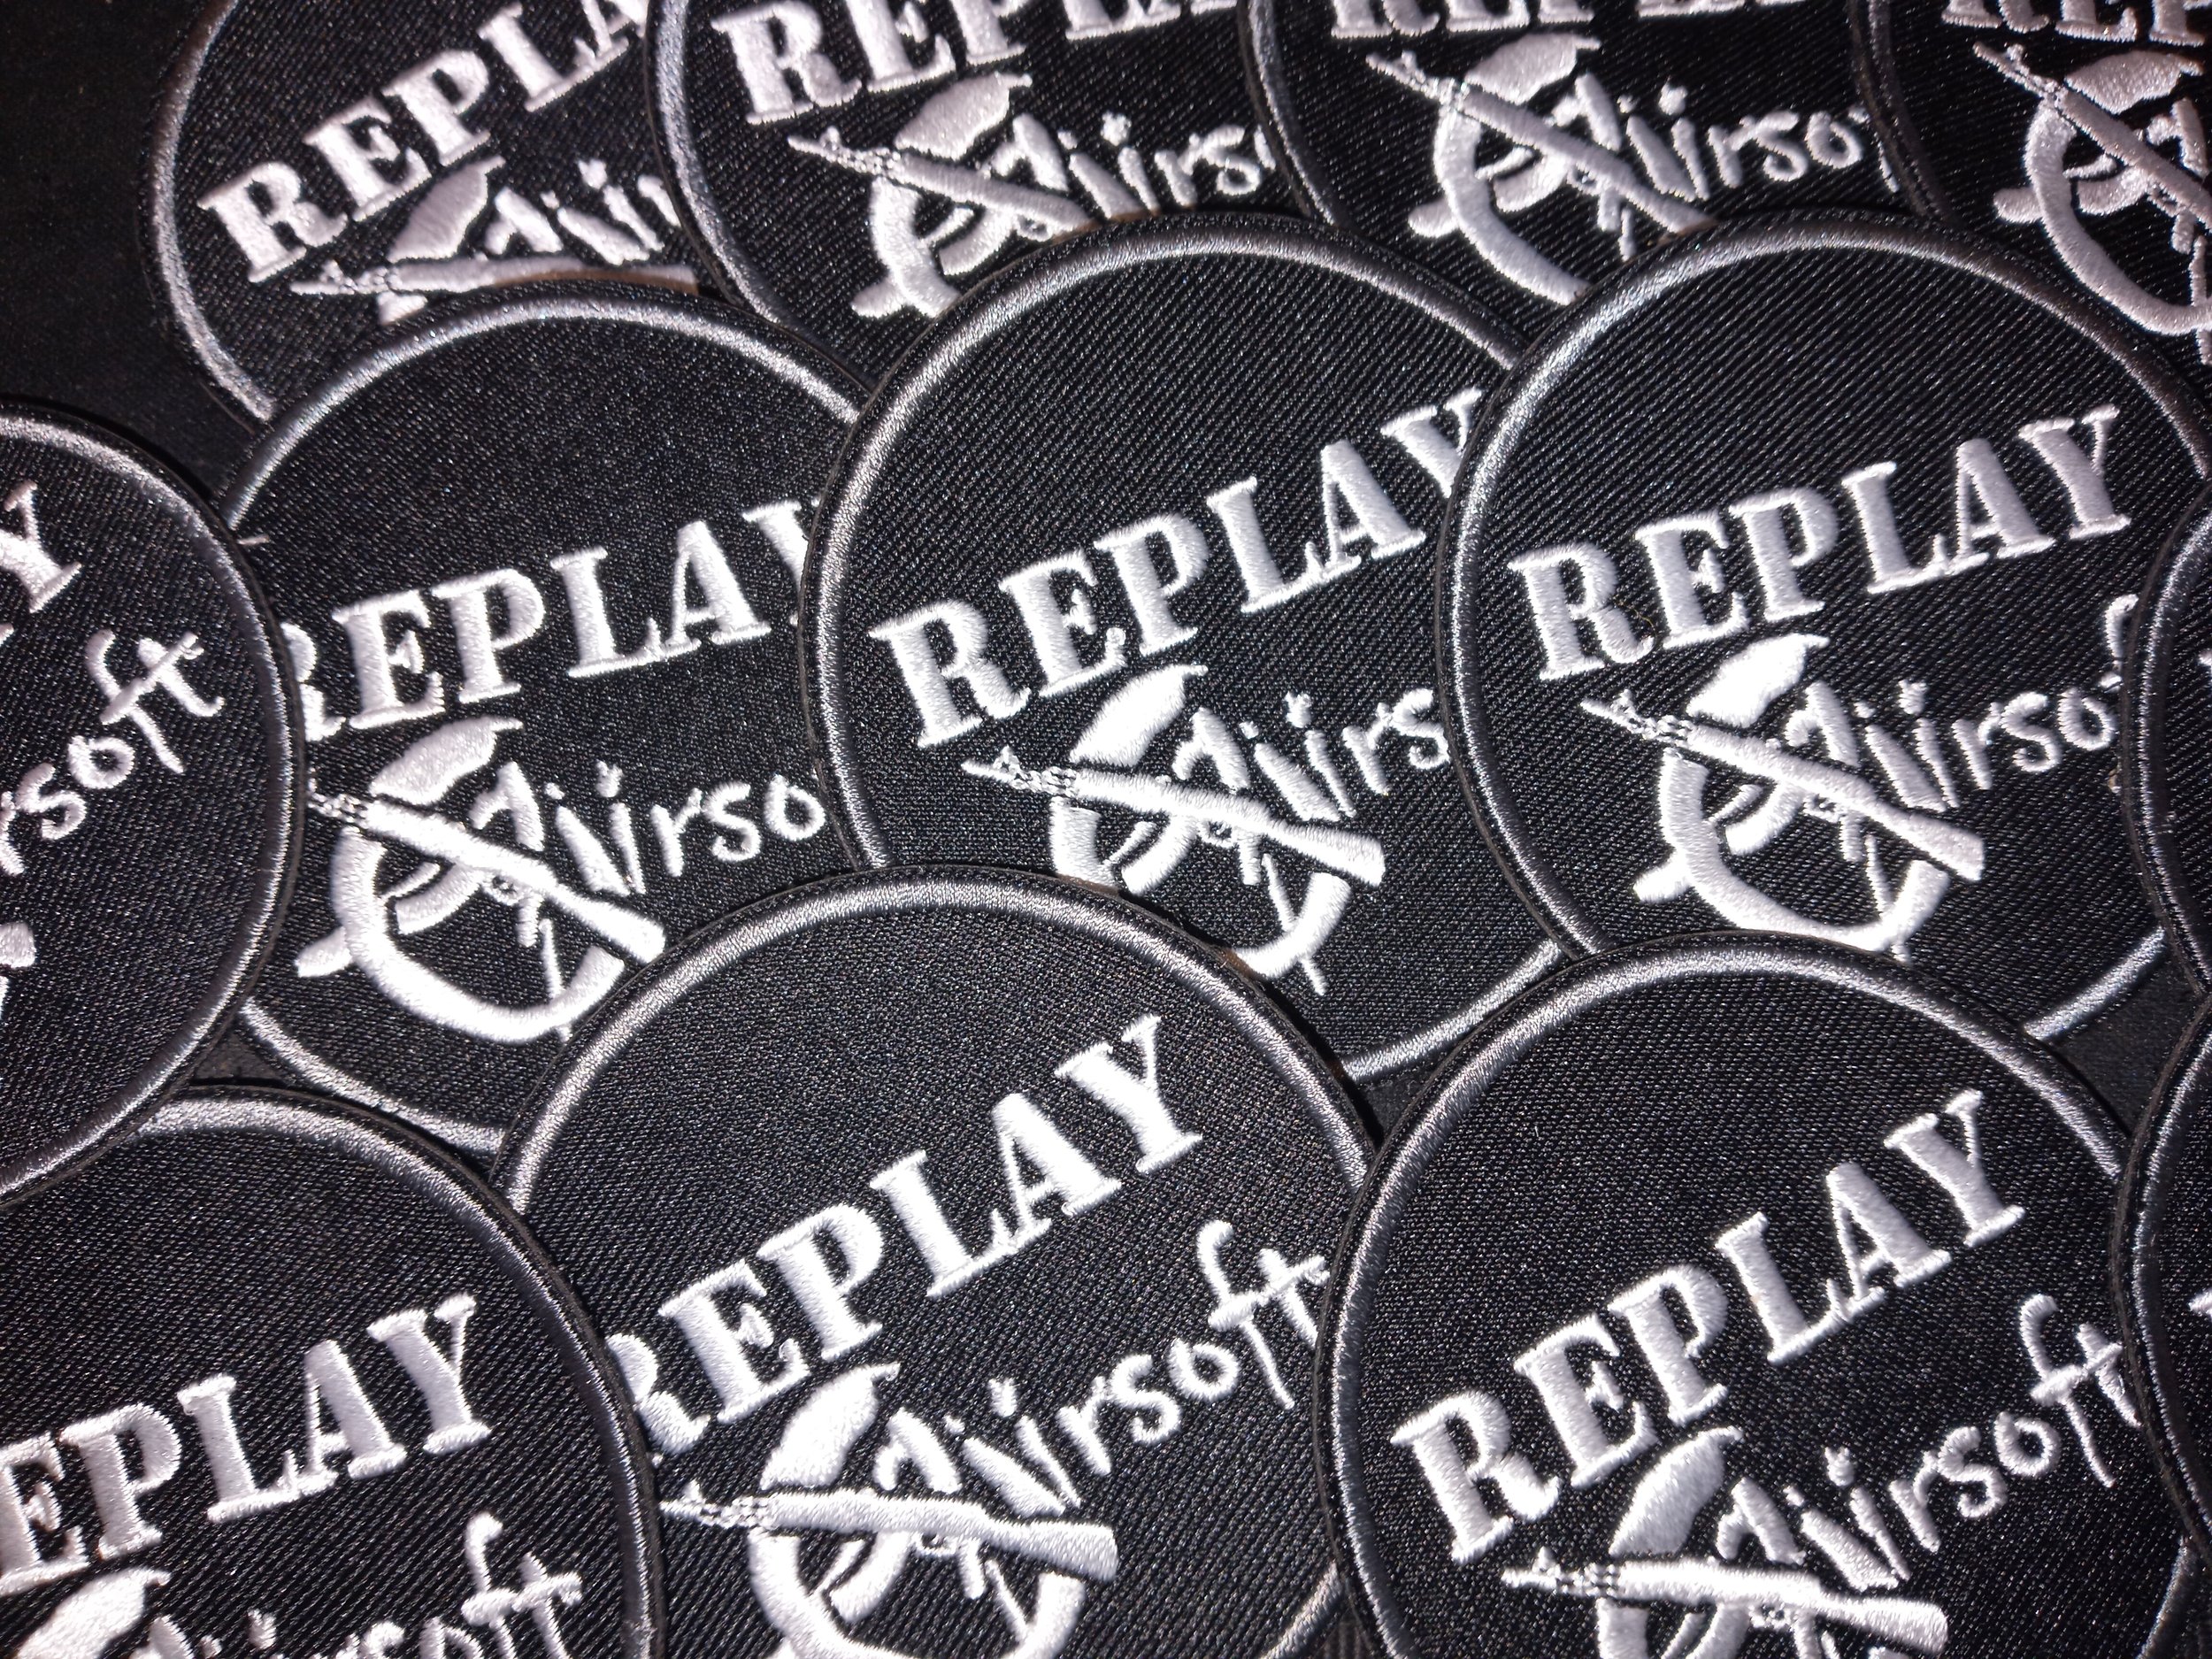 Replay Airsoft Patch — Replay Airsoft